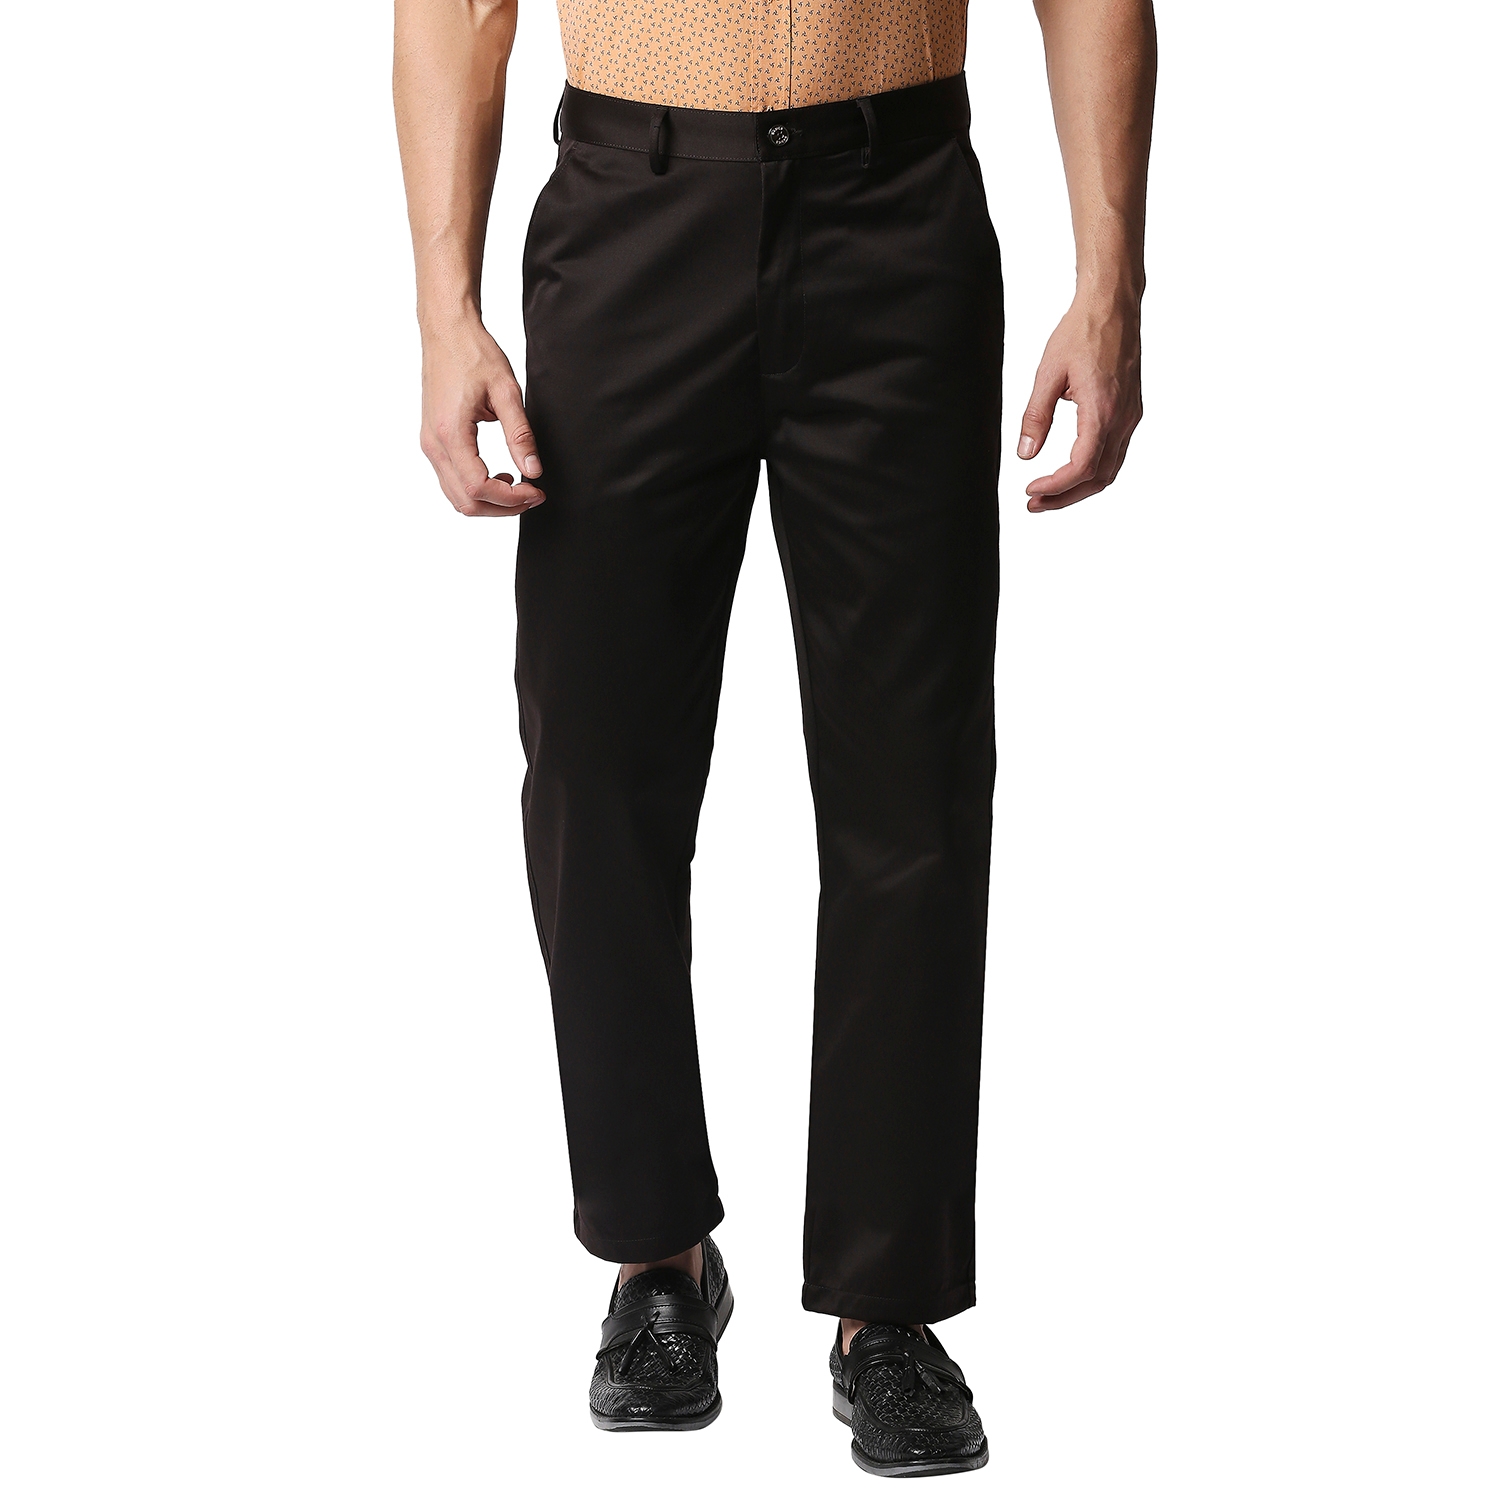 Basics | Basics Comfort Fit Coffee Satin Weave Poly Cotton Trousers